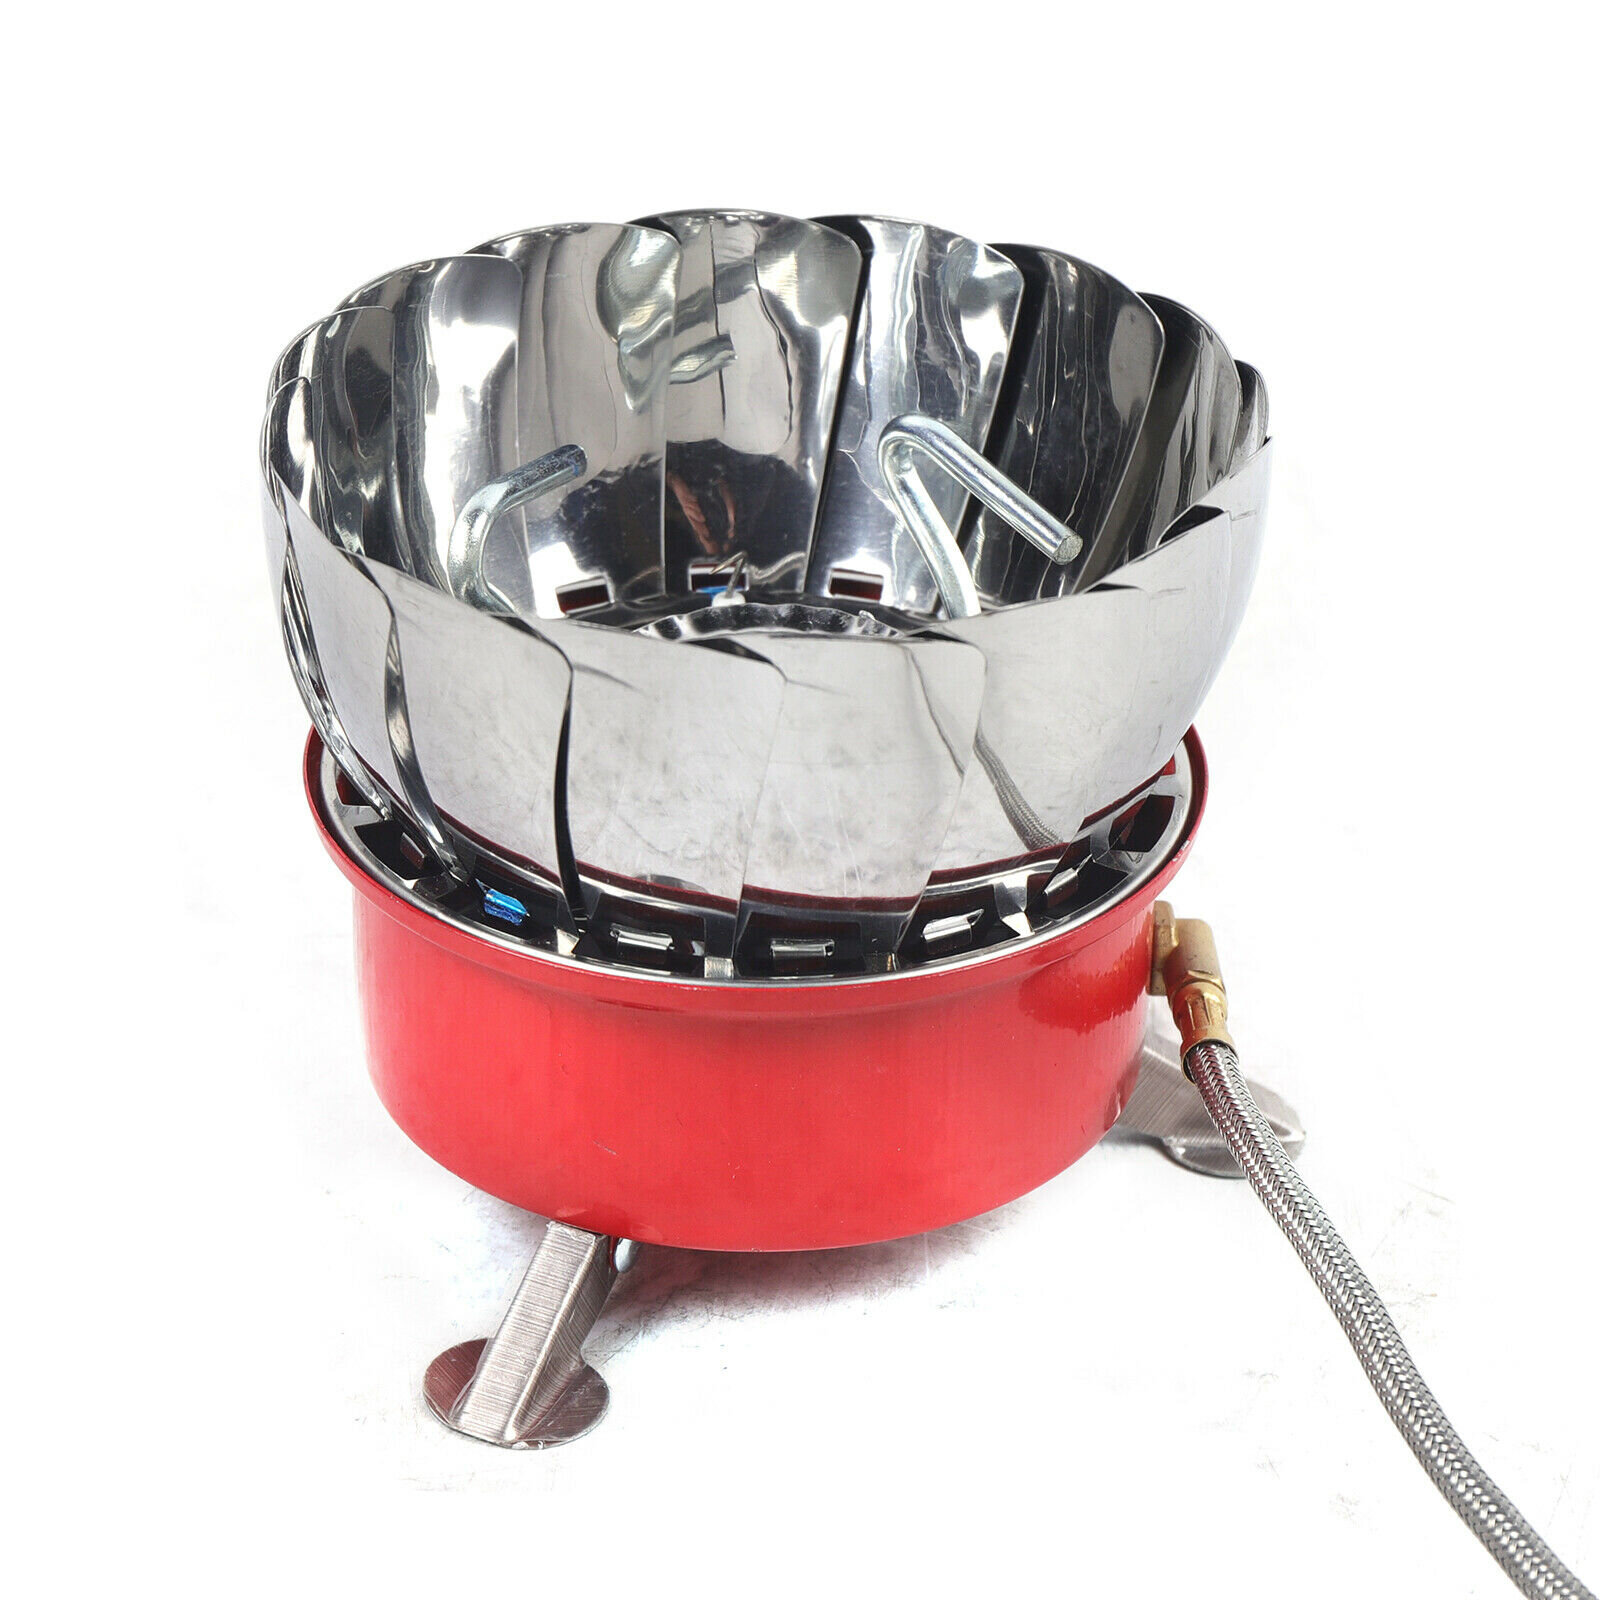 Mini Portable Square Stove Windproof Foldable Outdoor Camping Stove